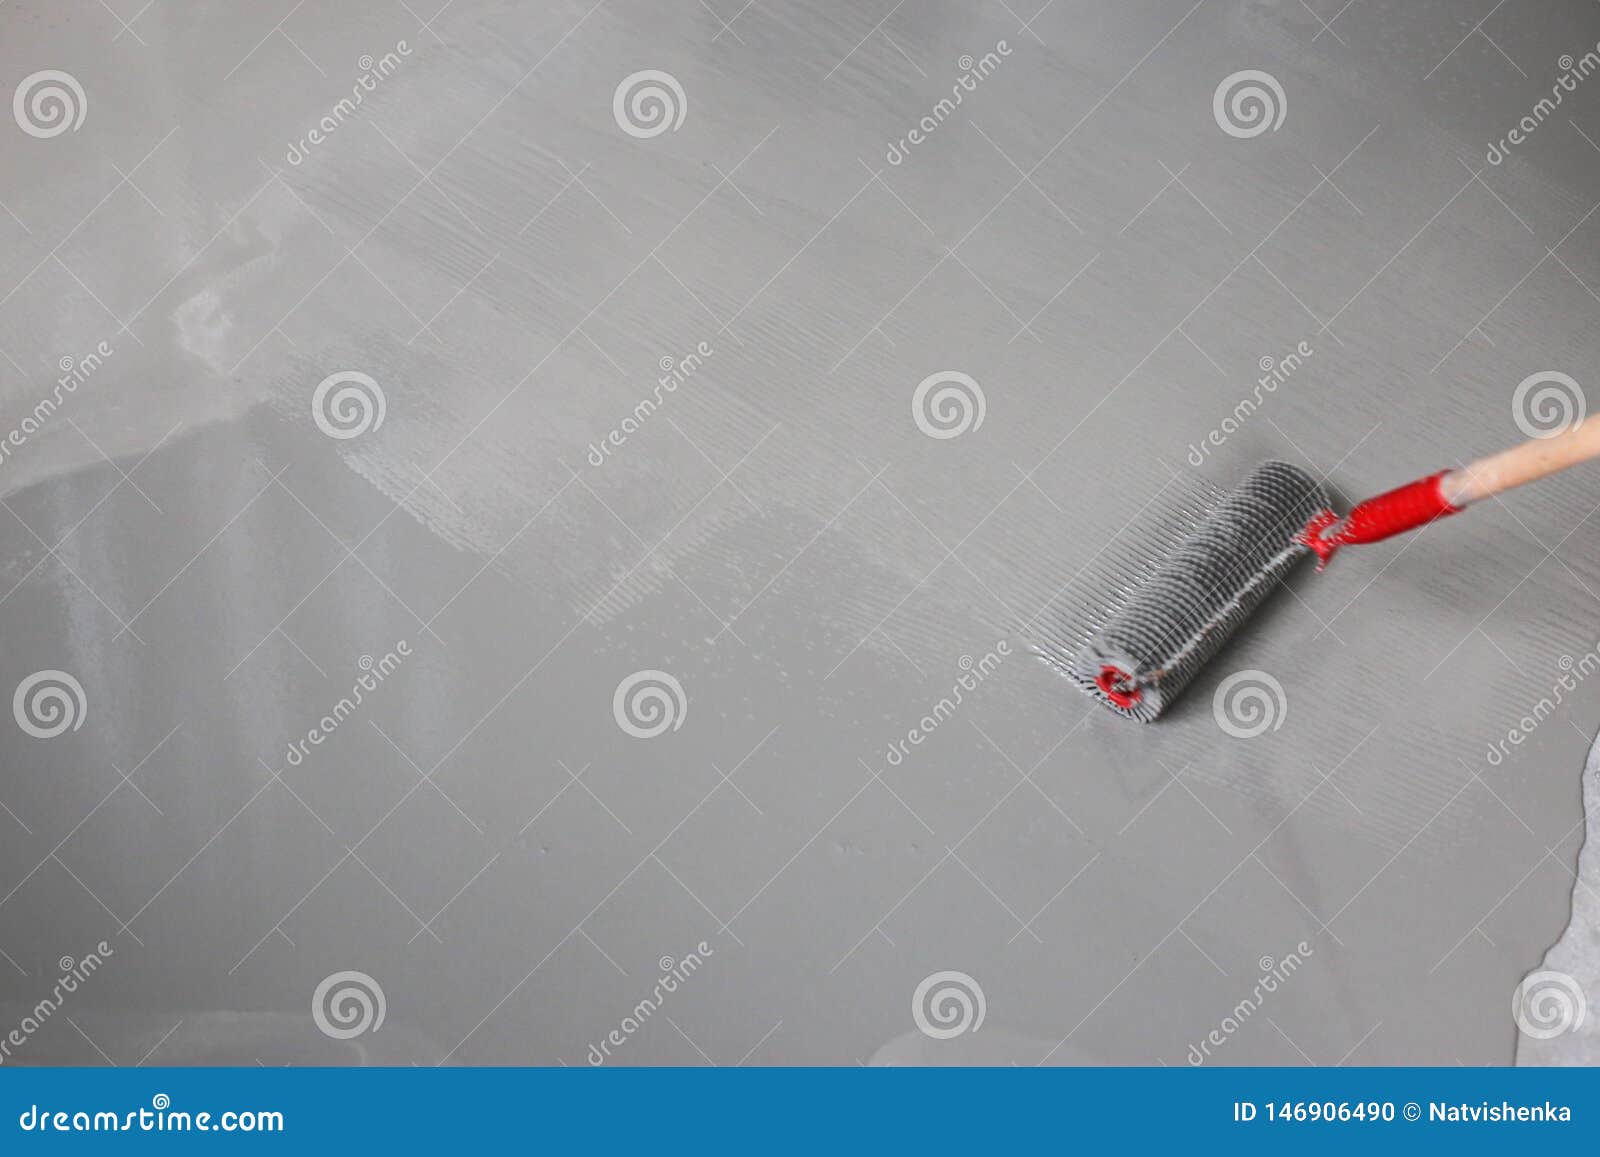 Fill Screed Floor Repair And Furnish Shallow Dof Stock Photo